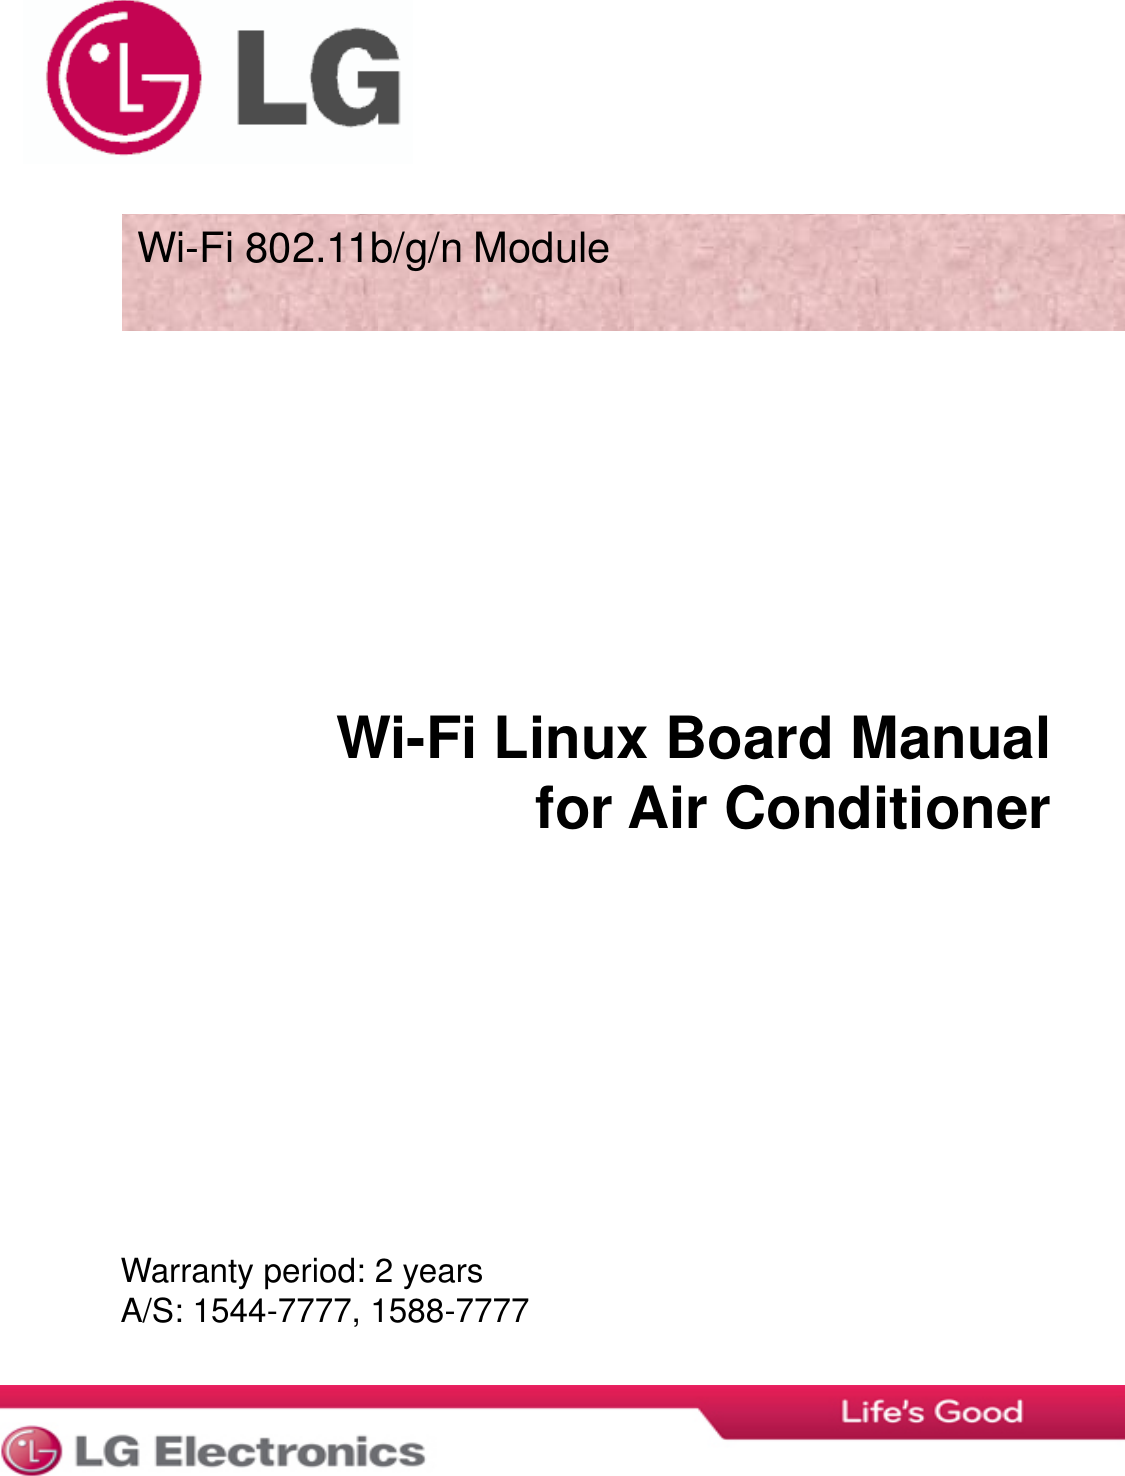 Wi-Fi 802.11b/g/n Module  Wi-Fi Linux Board Manual for Air Conditioner  Warranty period: 2 years A/S: 1544-7777, 1588-7777 